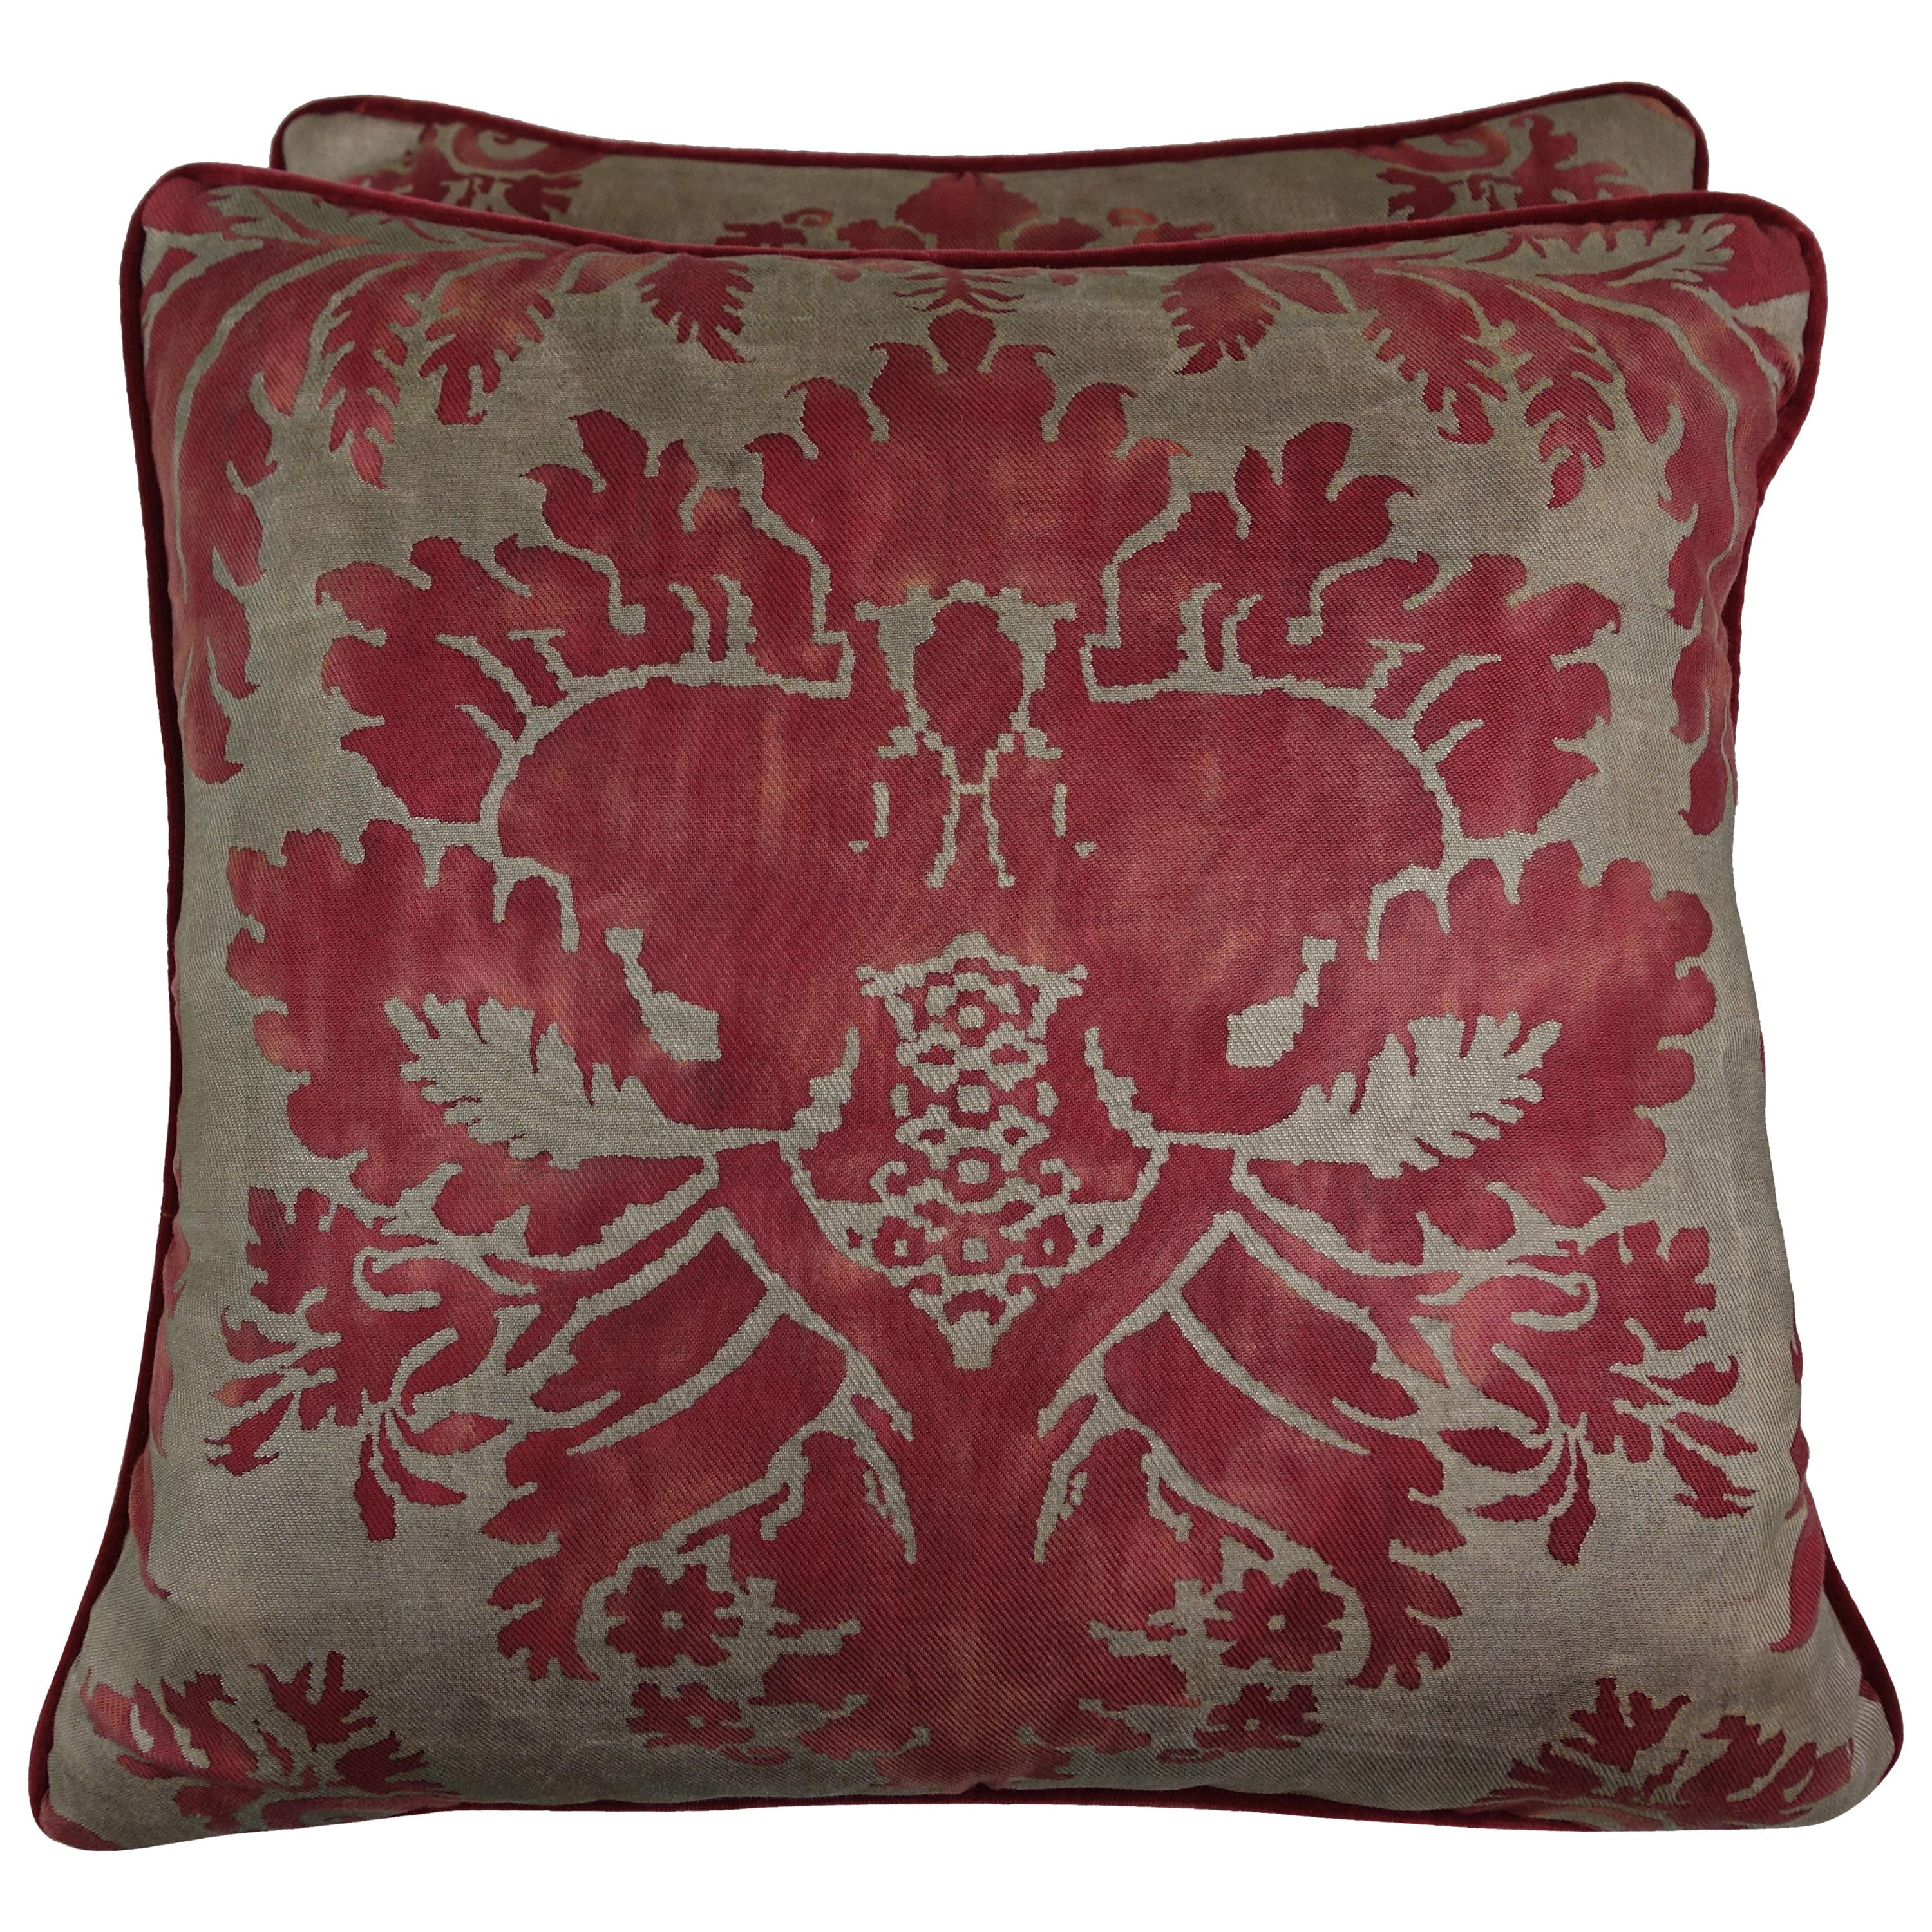 Glicine Patterned Red and Gold Fortuny Pillows, a Pair